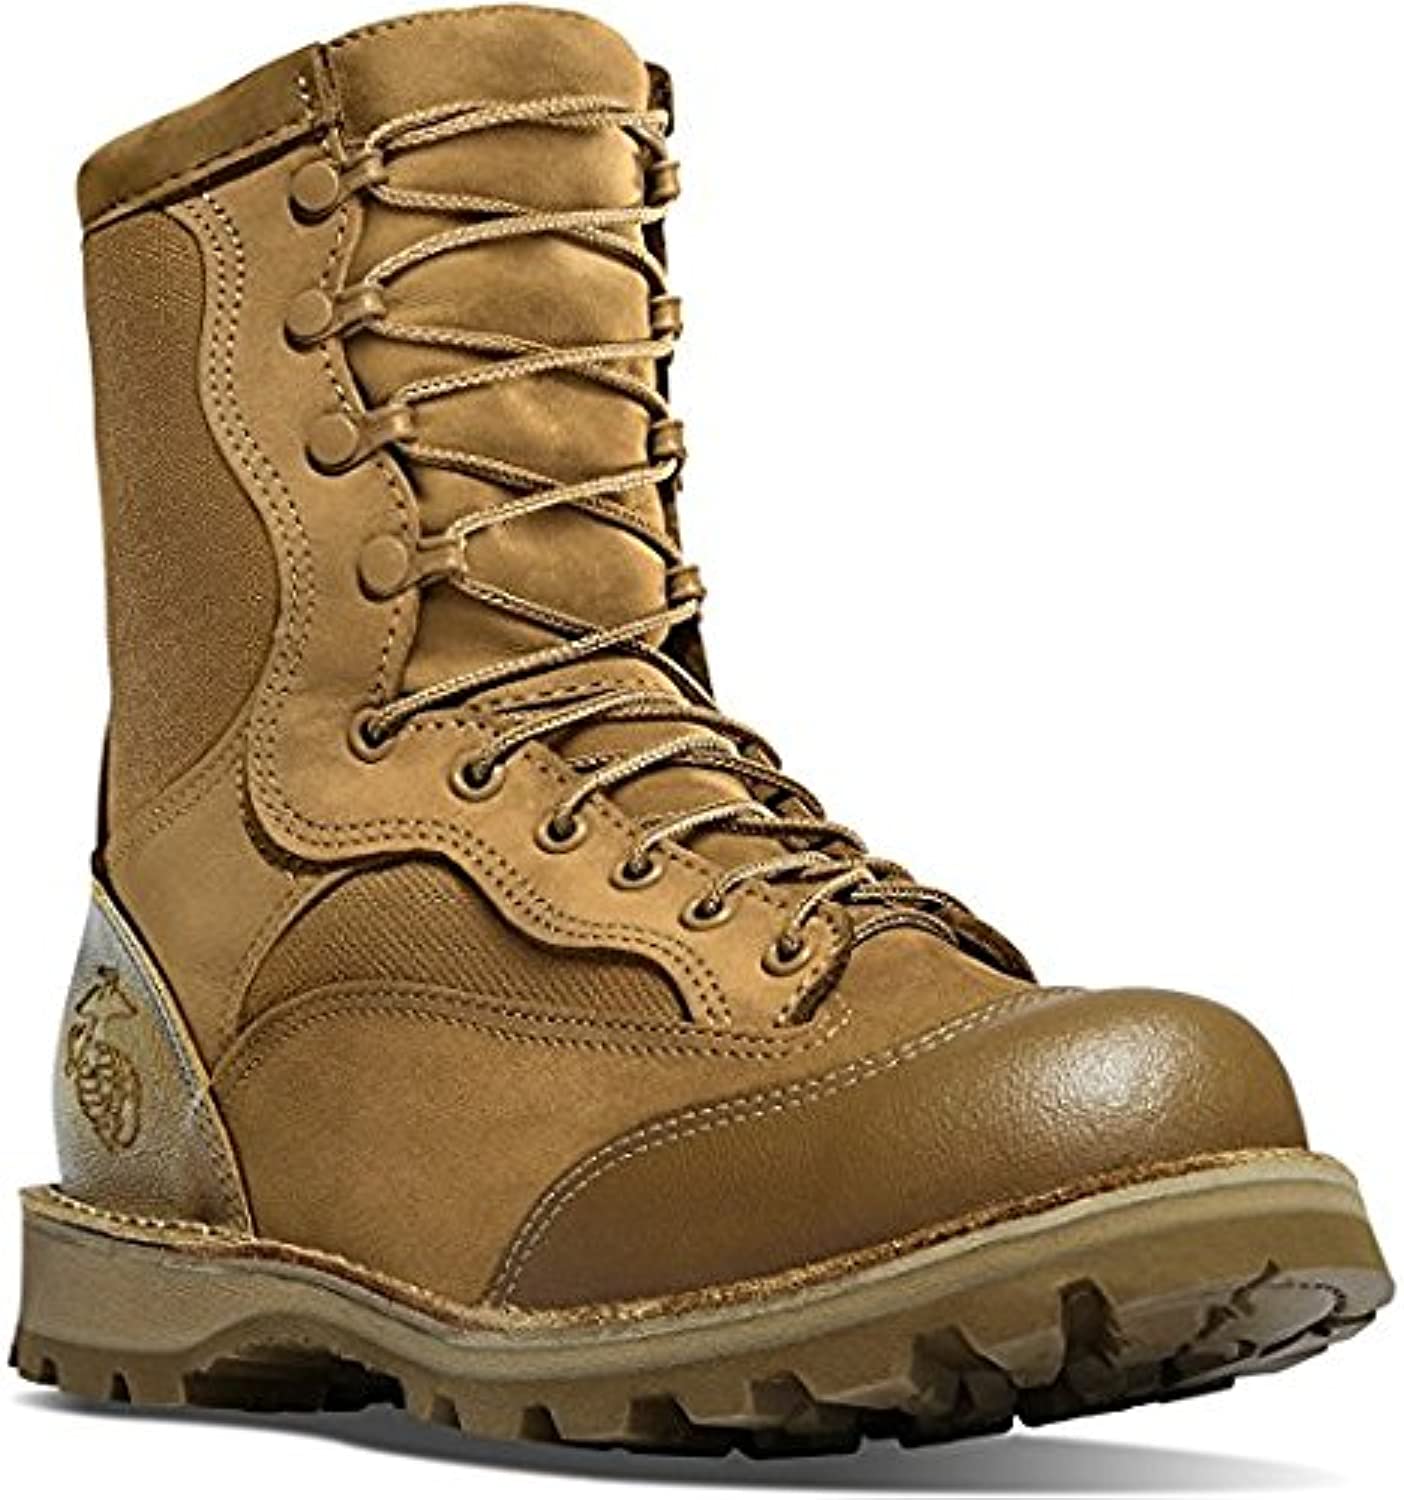 Danner MOJAVE Plain Toe Vibram Sole | Made in USA Duty Boots Military Combat (10 W)